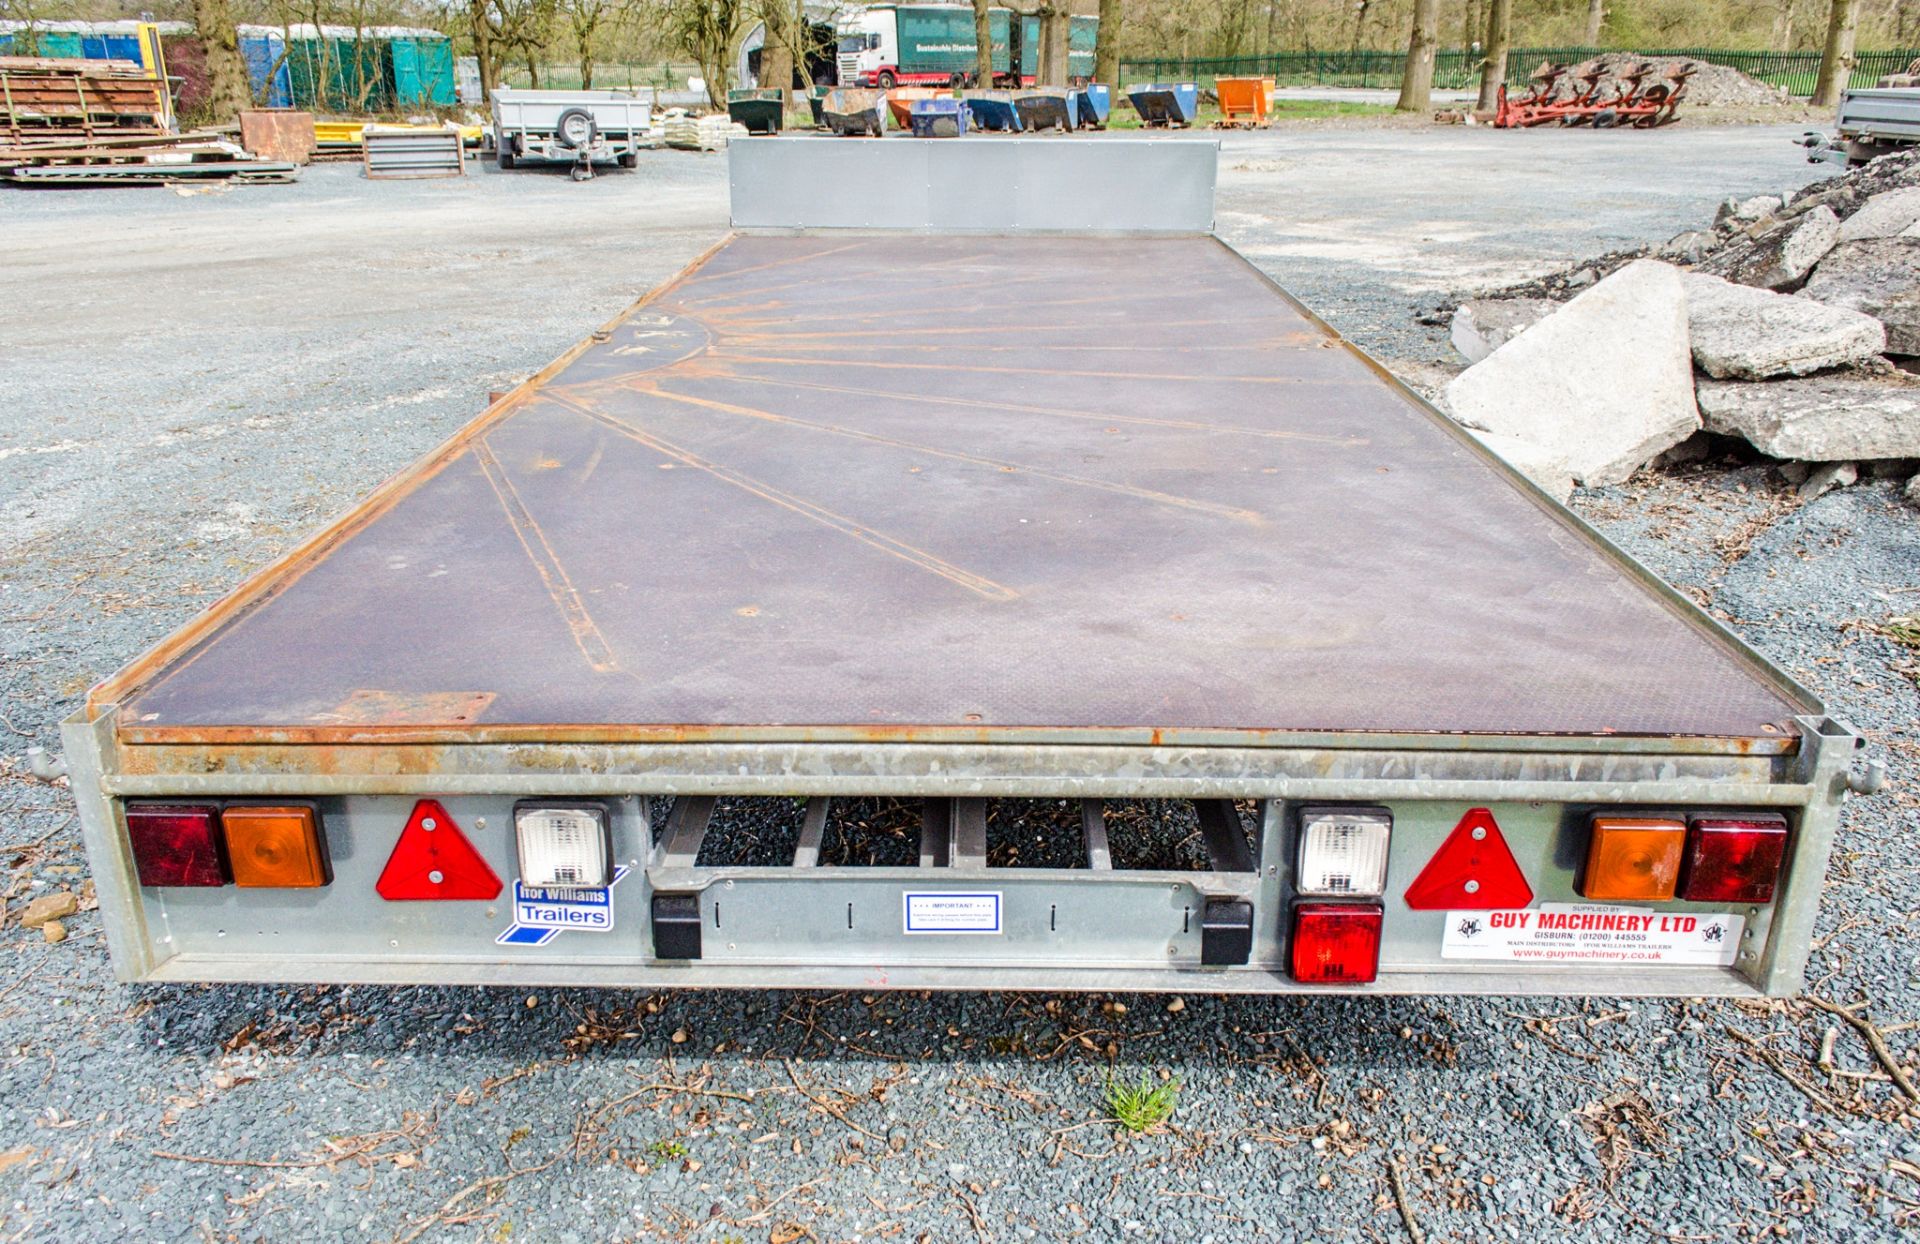 Ifor Williams LM166G 16 ft x 6 ft 6 inch flat bed tandem axle trailer S/N: 5114235 c/w head board, - Image 3 of 4